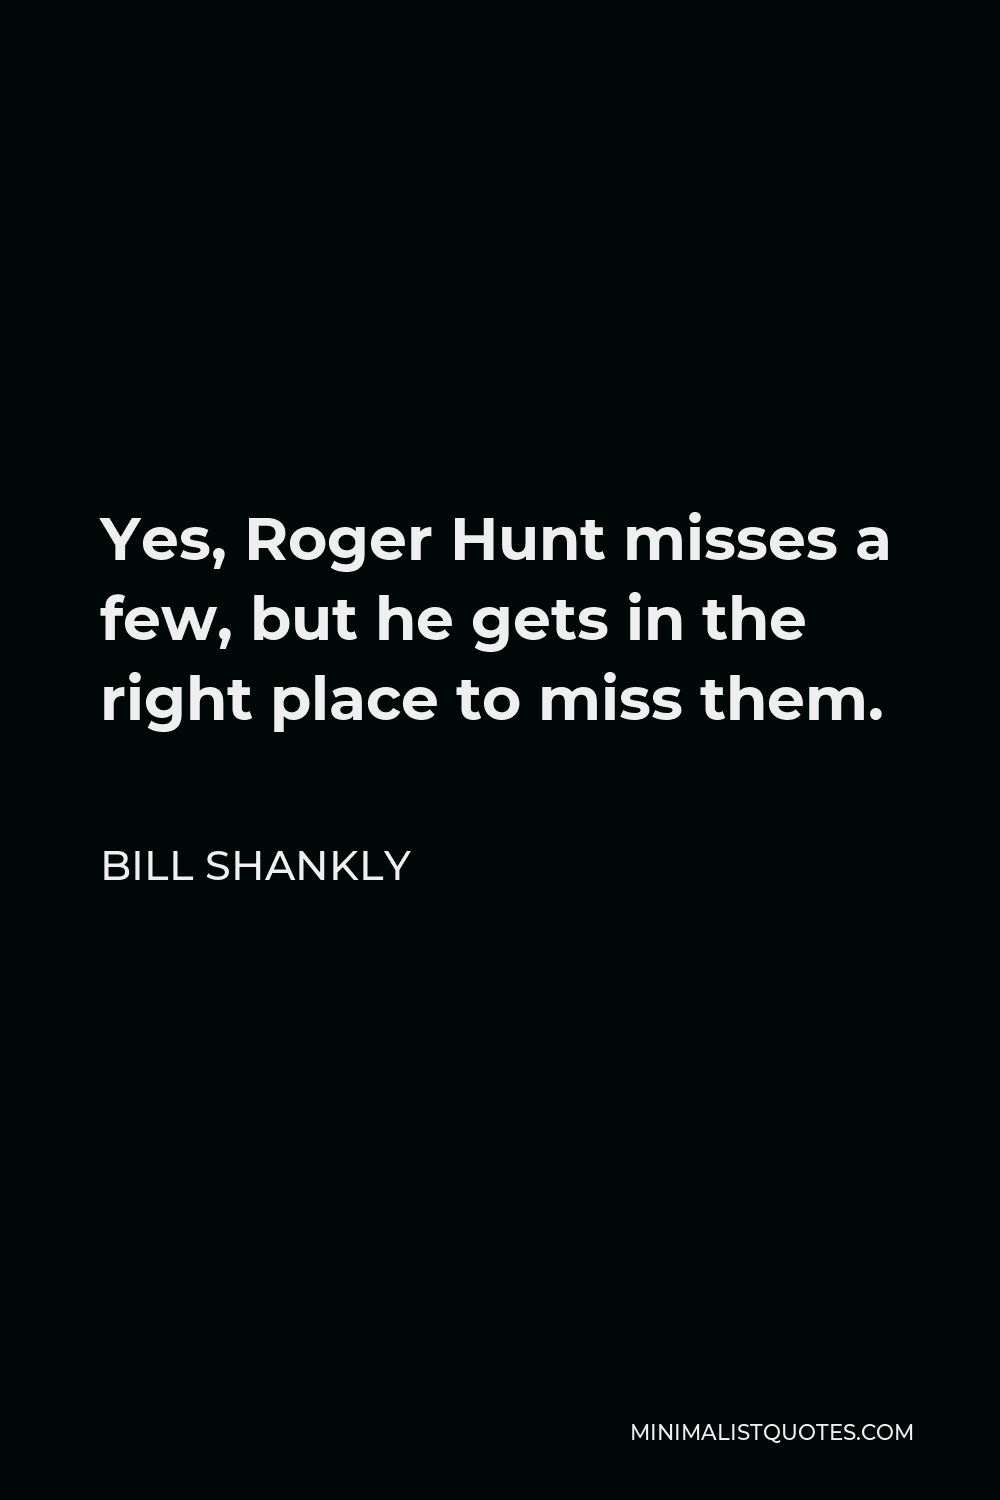 Bill Shankly Quote - Yes, Roger Hunt misses a few, but he gets in the right place to miss them.